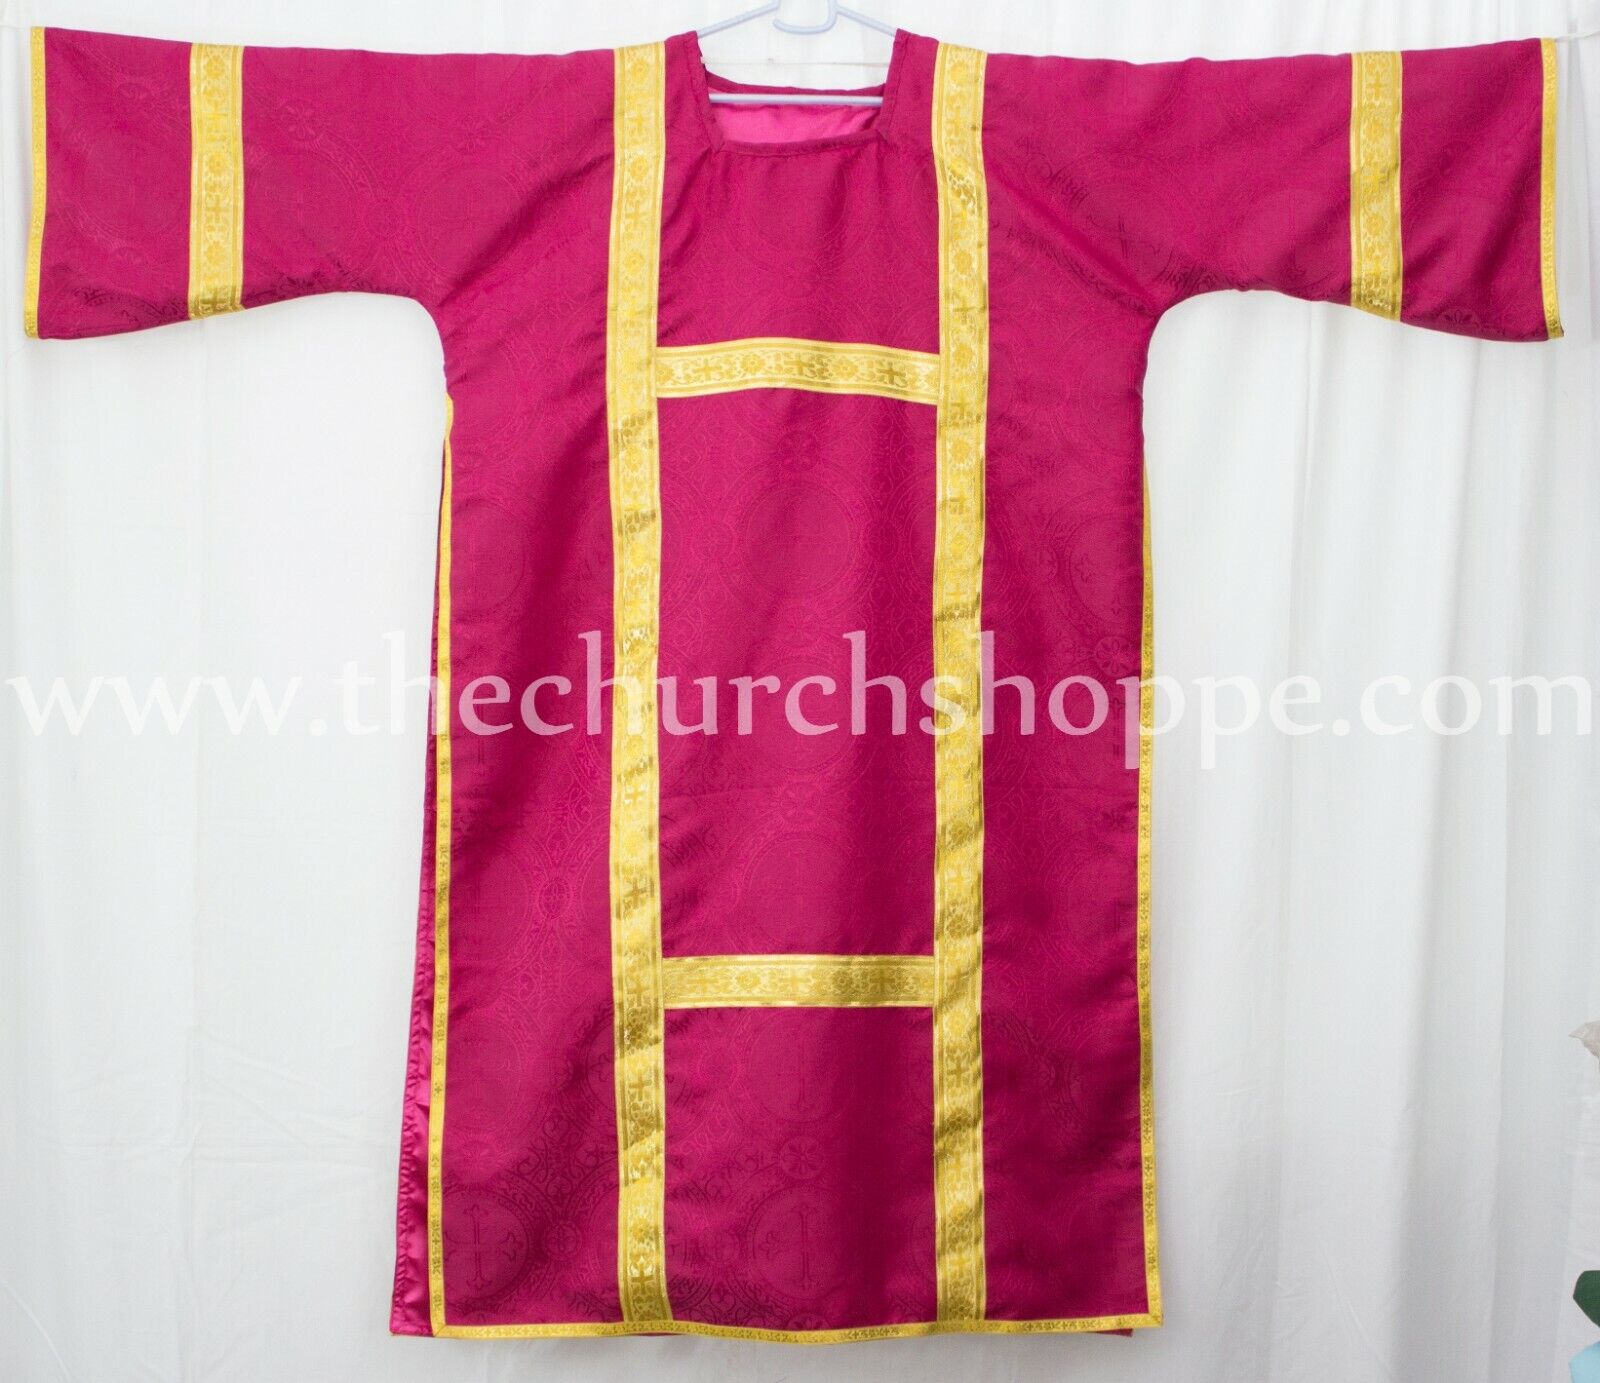 Dark ROSE vestment with Deacon's stole and maniple lined,Dalmatic chasuble